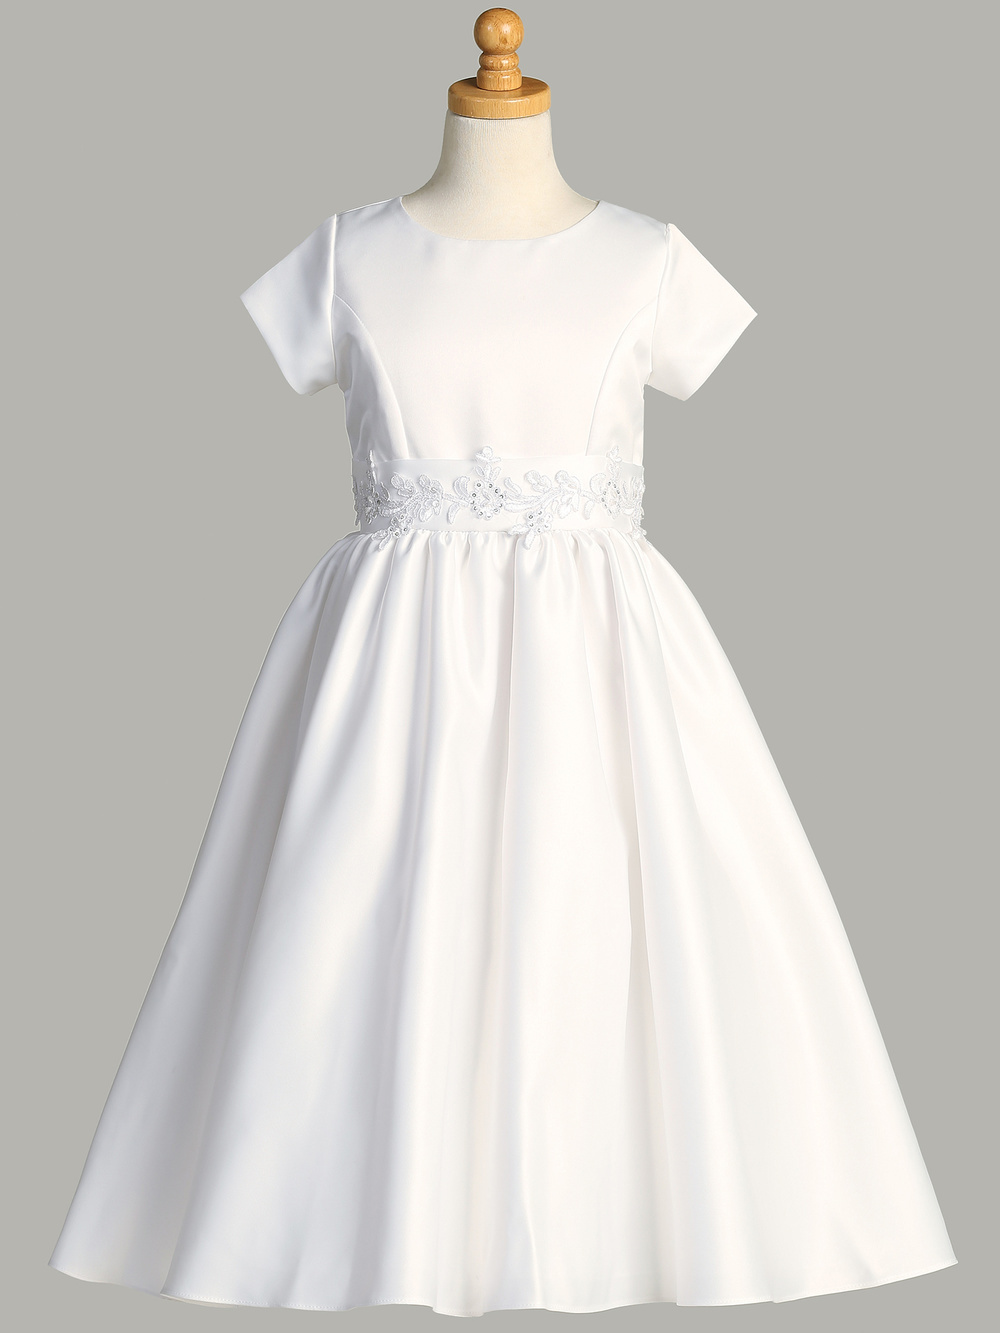 SP185 WHT Satin with silver corded trim - Dresses